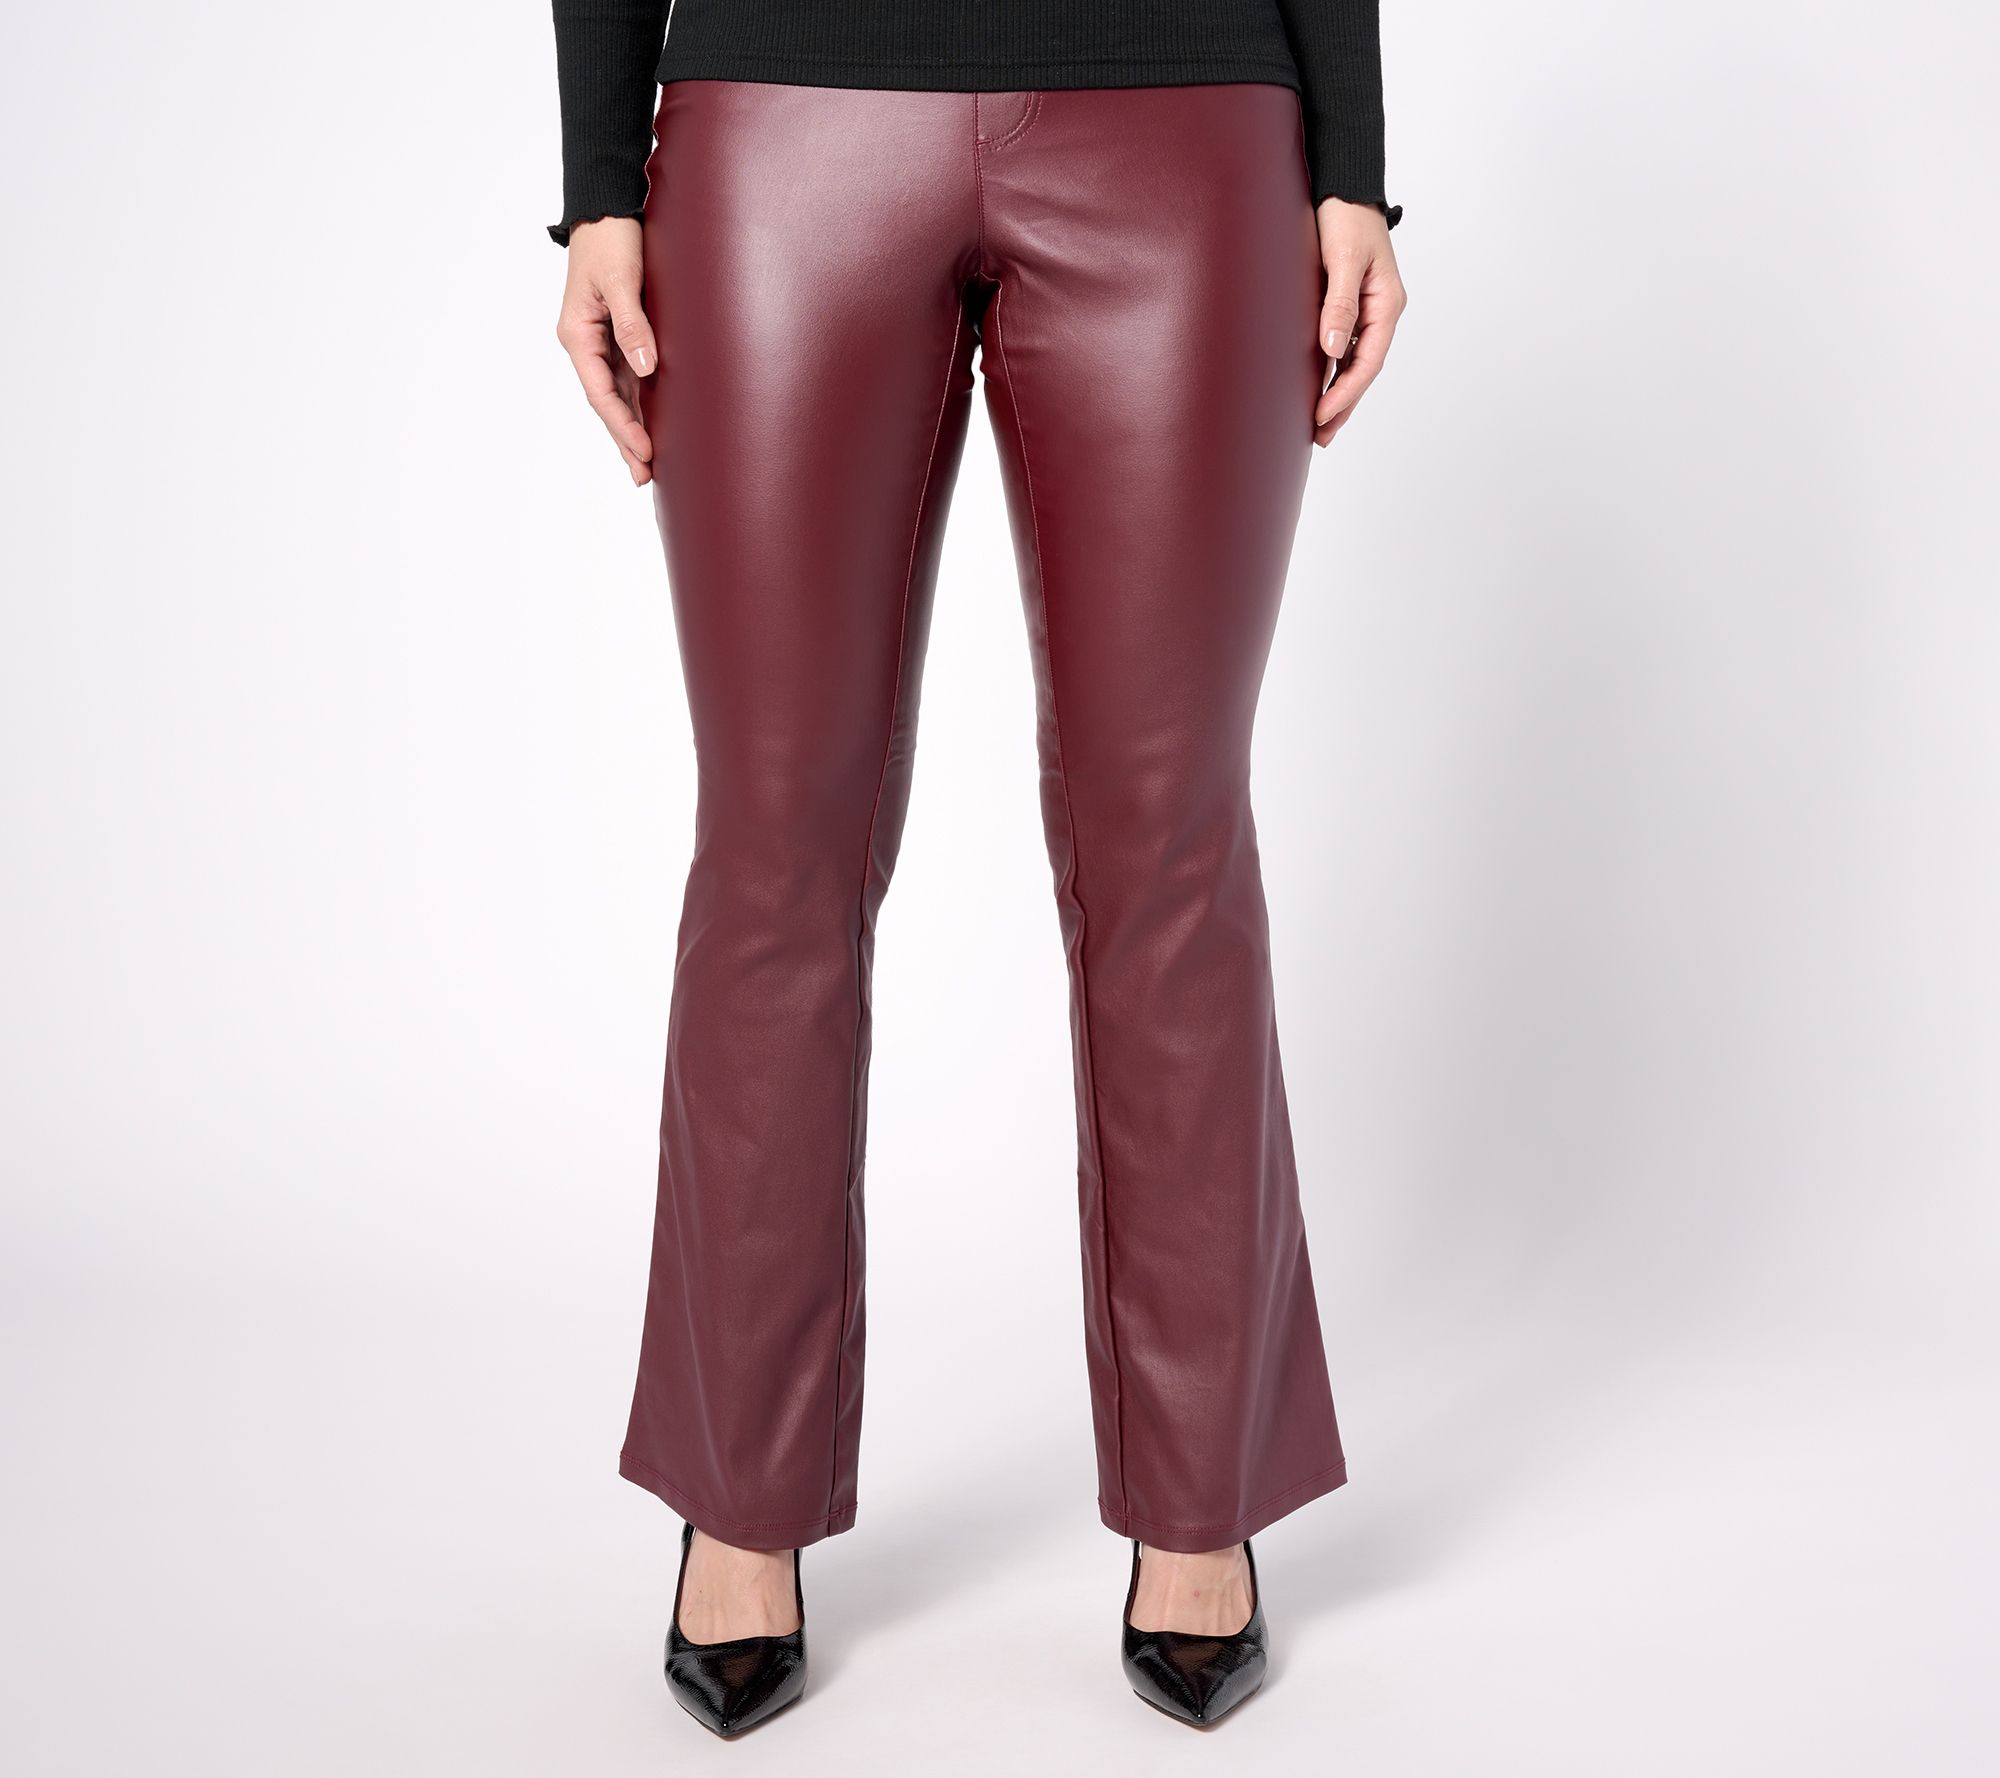 Jingle Belles by Kim Gravel Rebelleious Coated Holiday Flare Pant - QVC.com